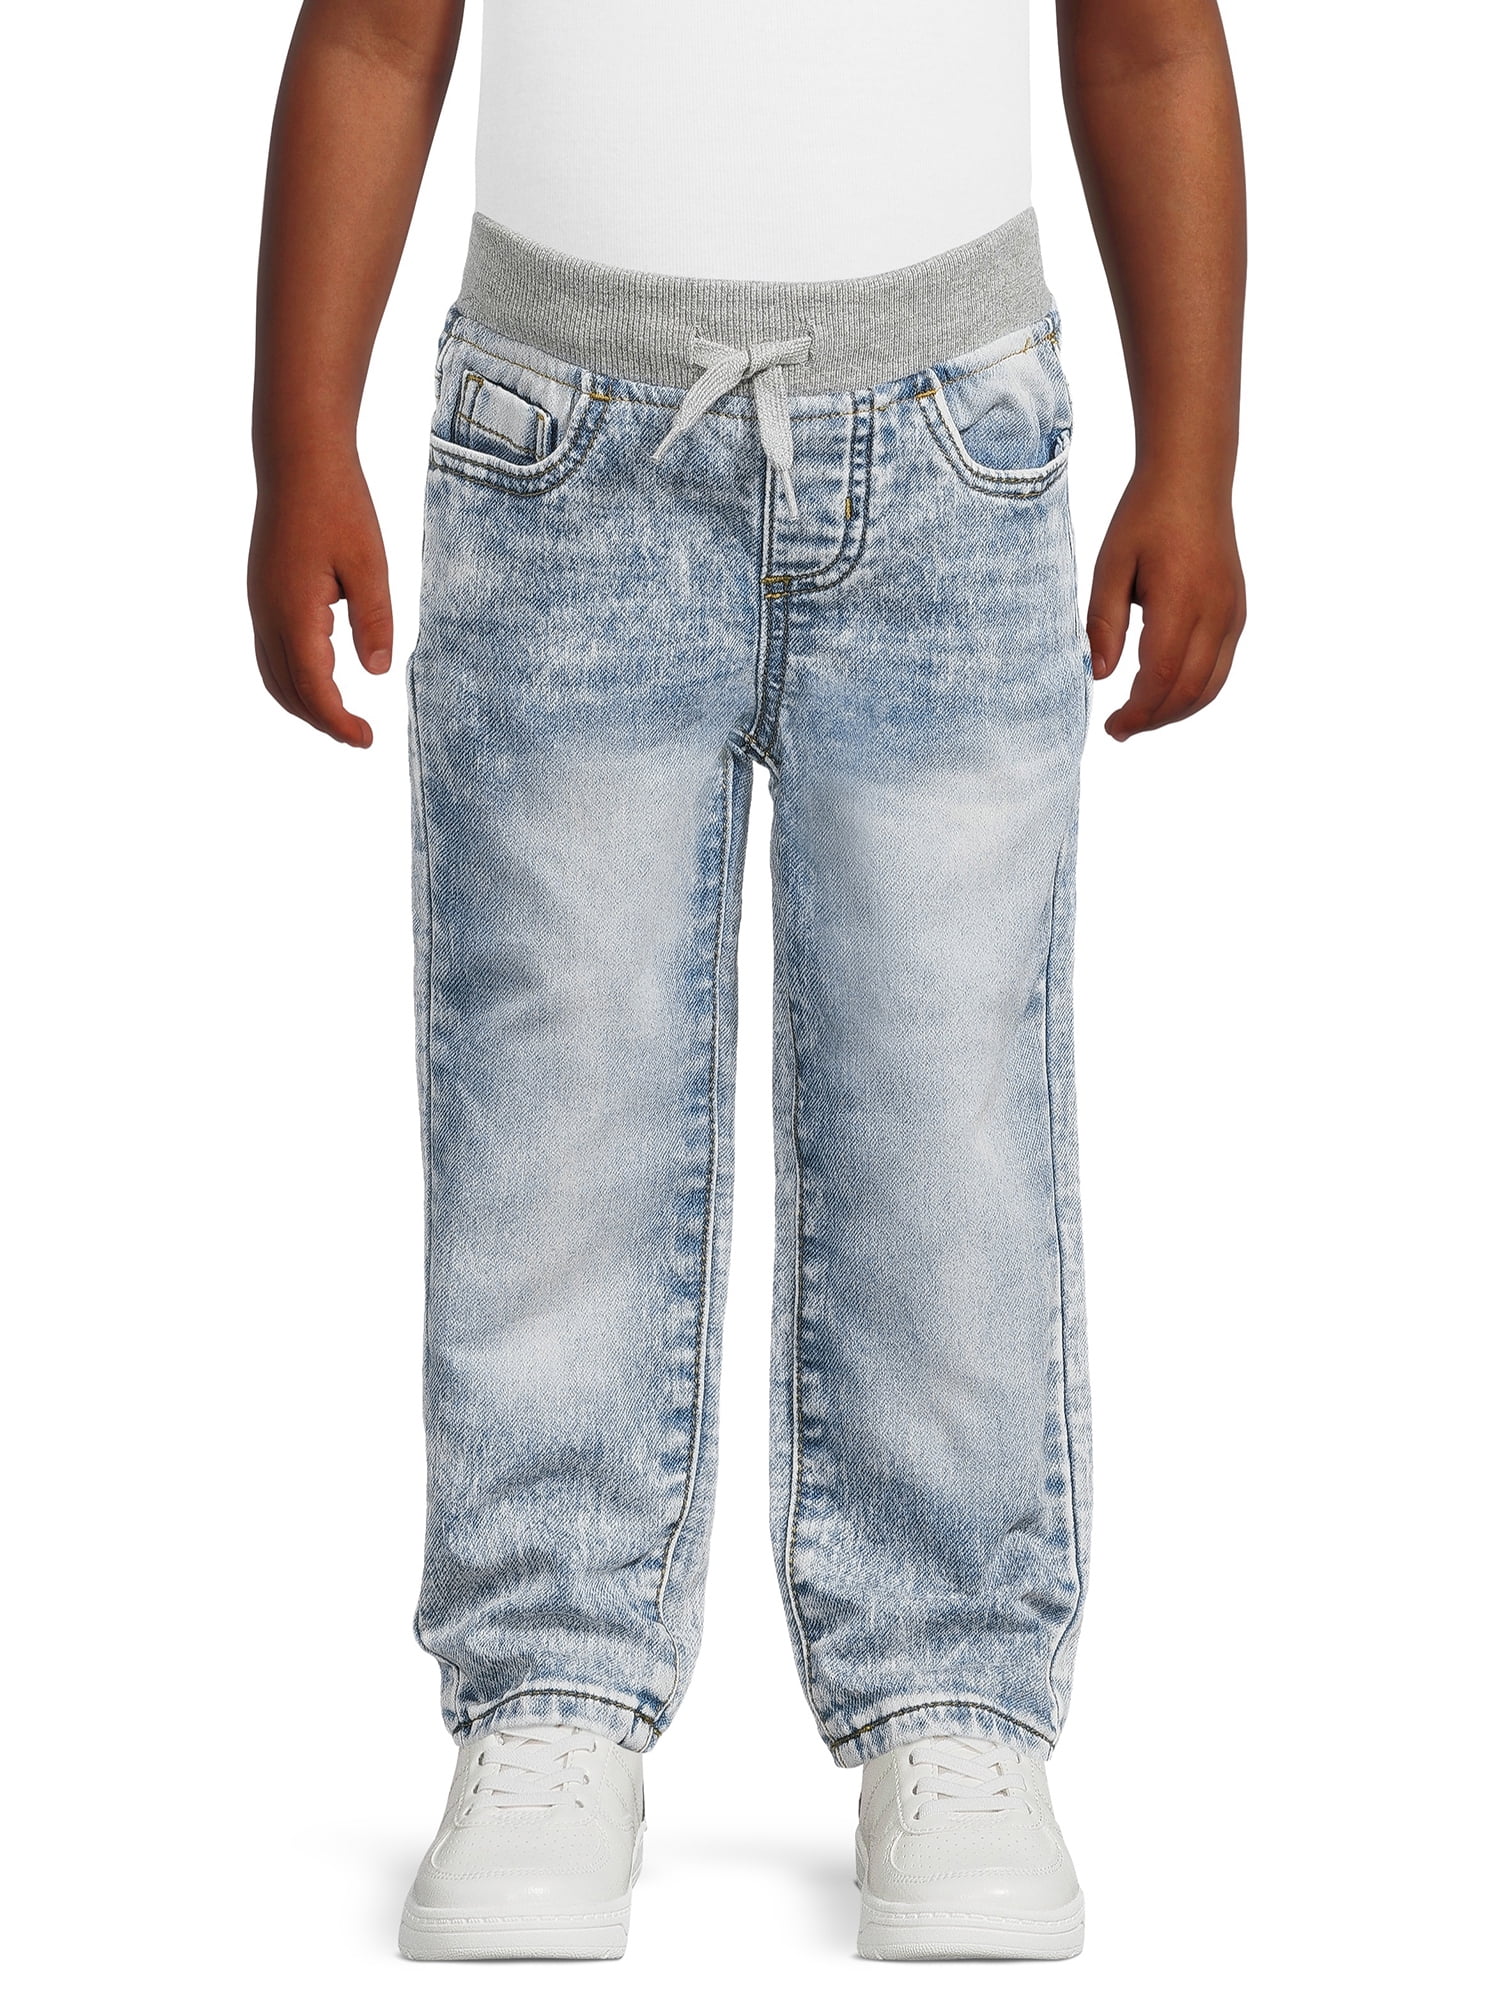 Nation 12M-5T Baby Denim Jeans, and Wonder Knit Sizes Boys\' Toddler